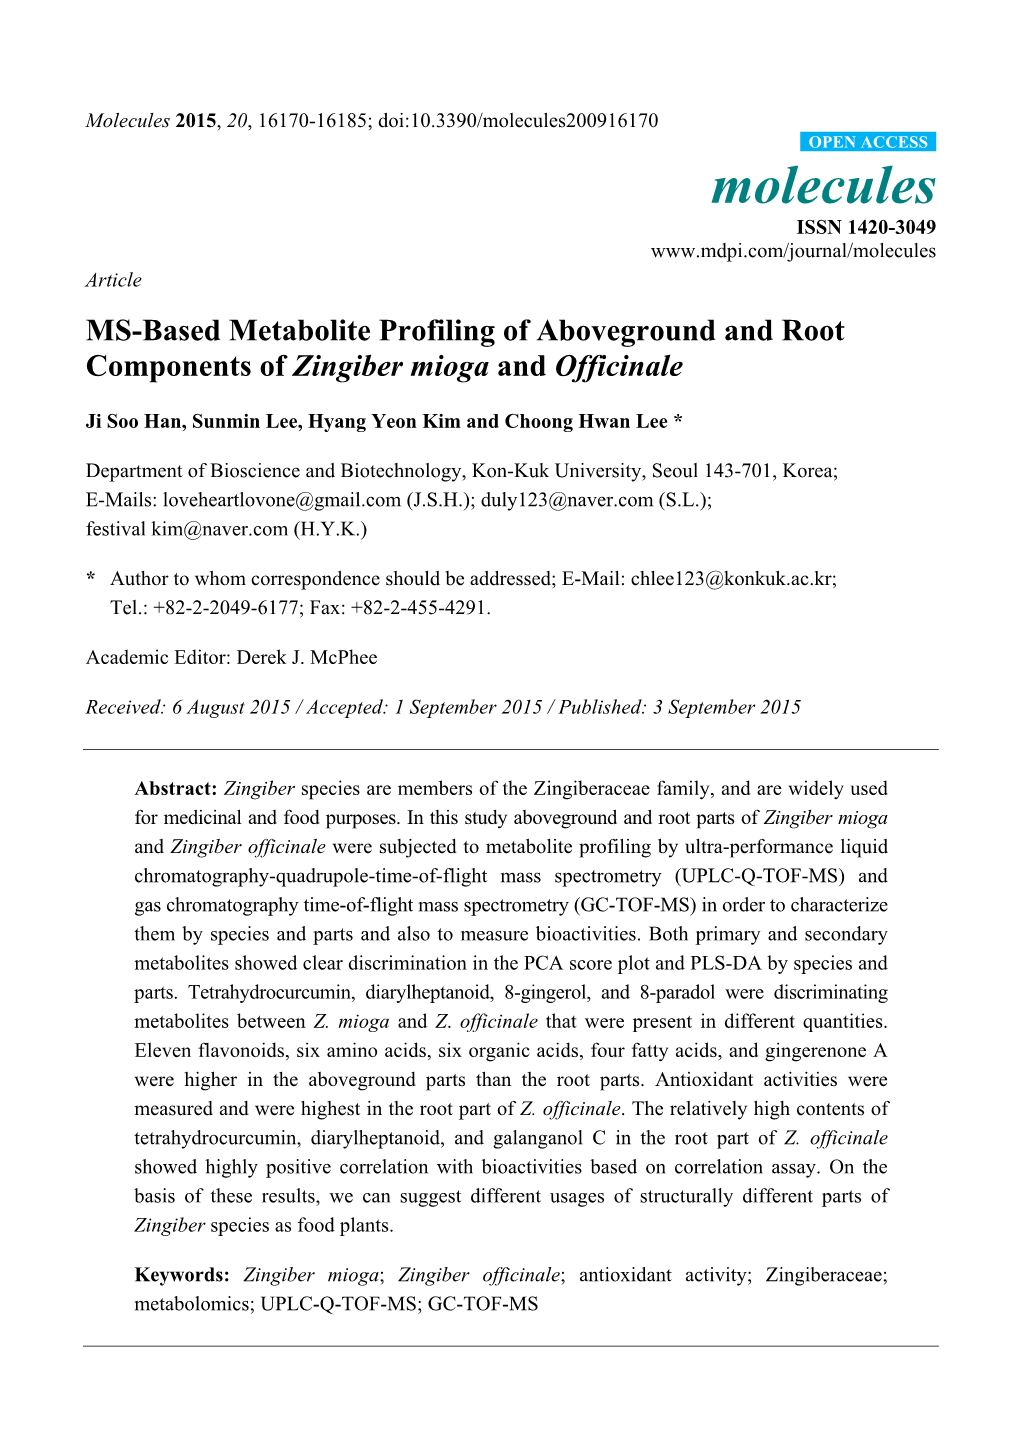 MS-Based Metabolite Profiling of Aboveground and Root Components of Zingiber Mioga and Officinale